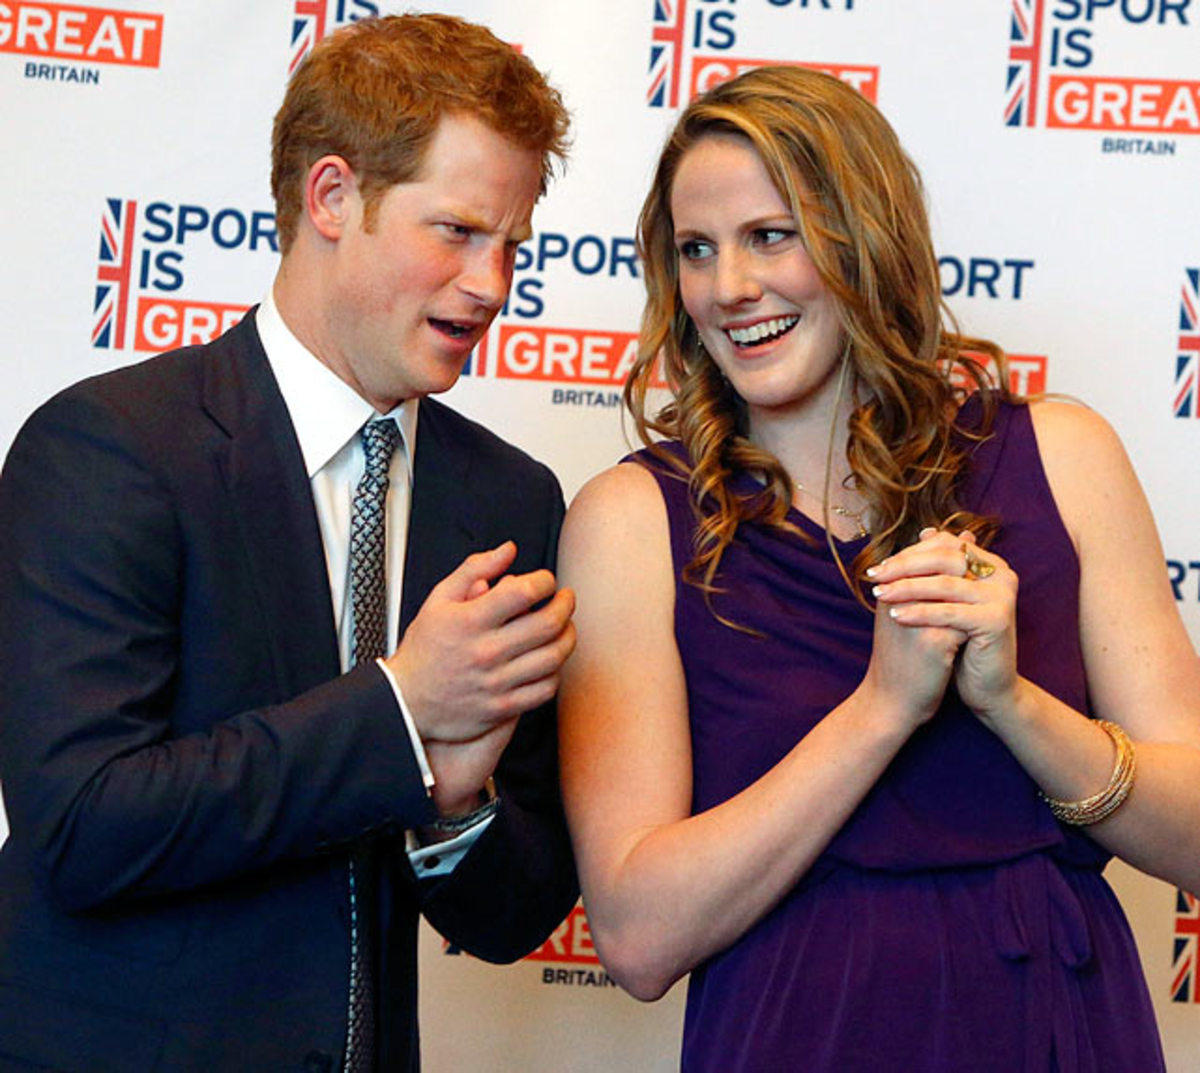 Prince Harry and Missy Franklin